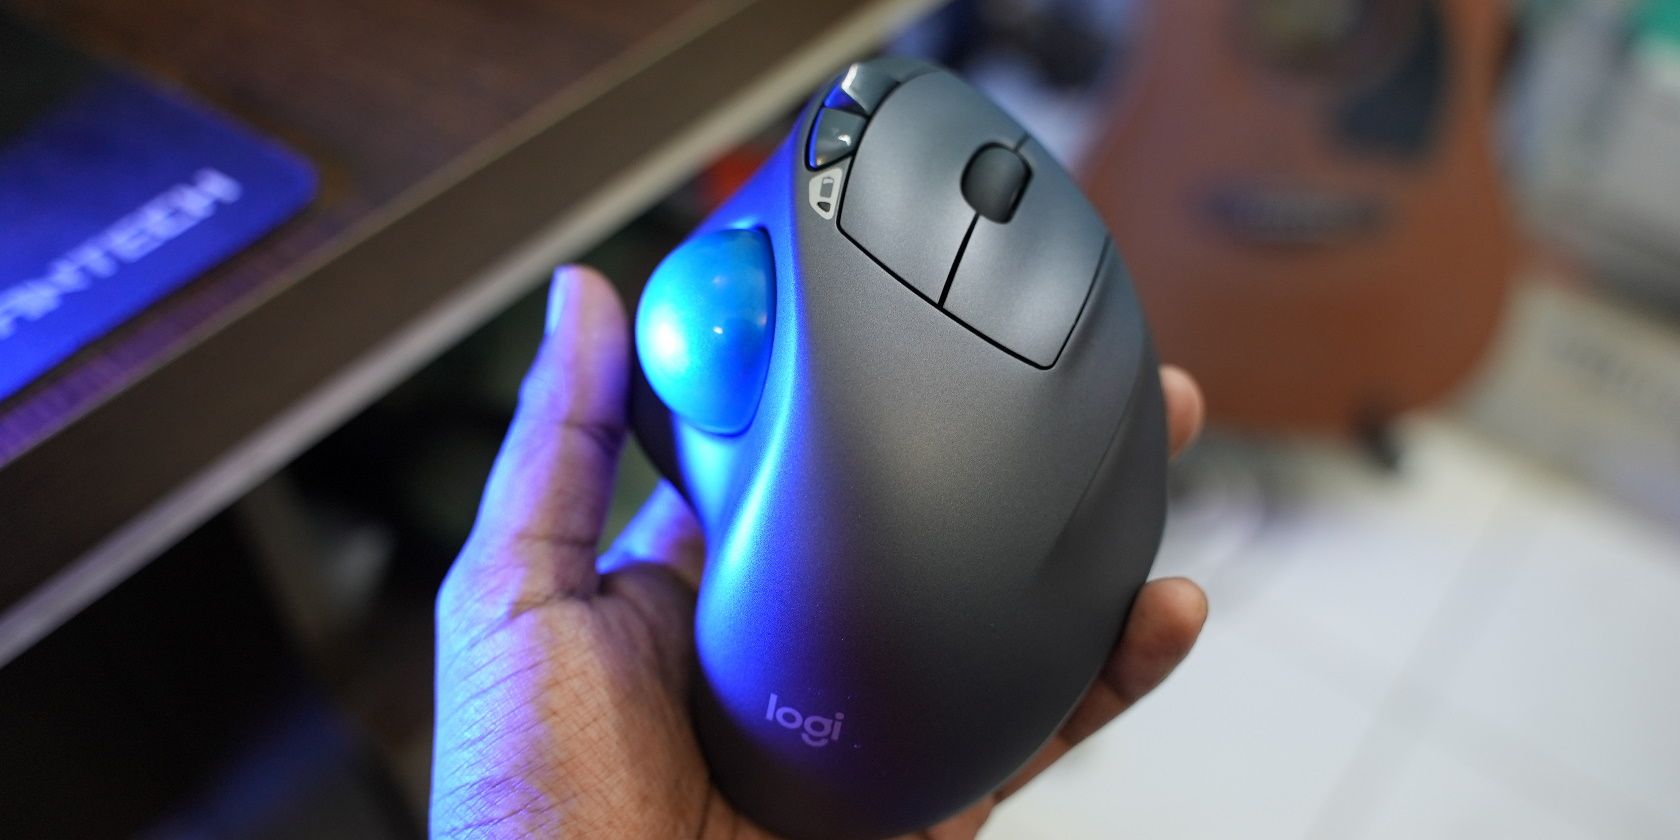 A Logitech M570 Trackball Mouse on a hand with blurred background